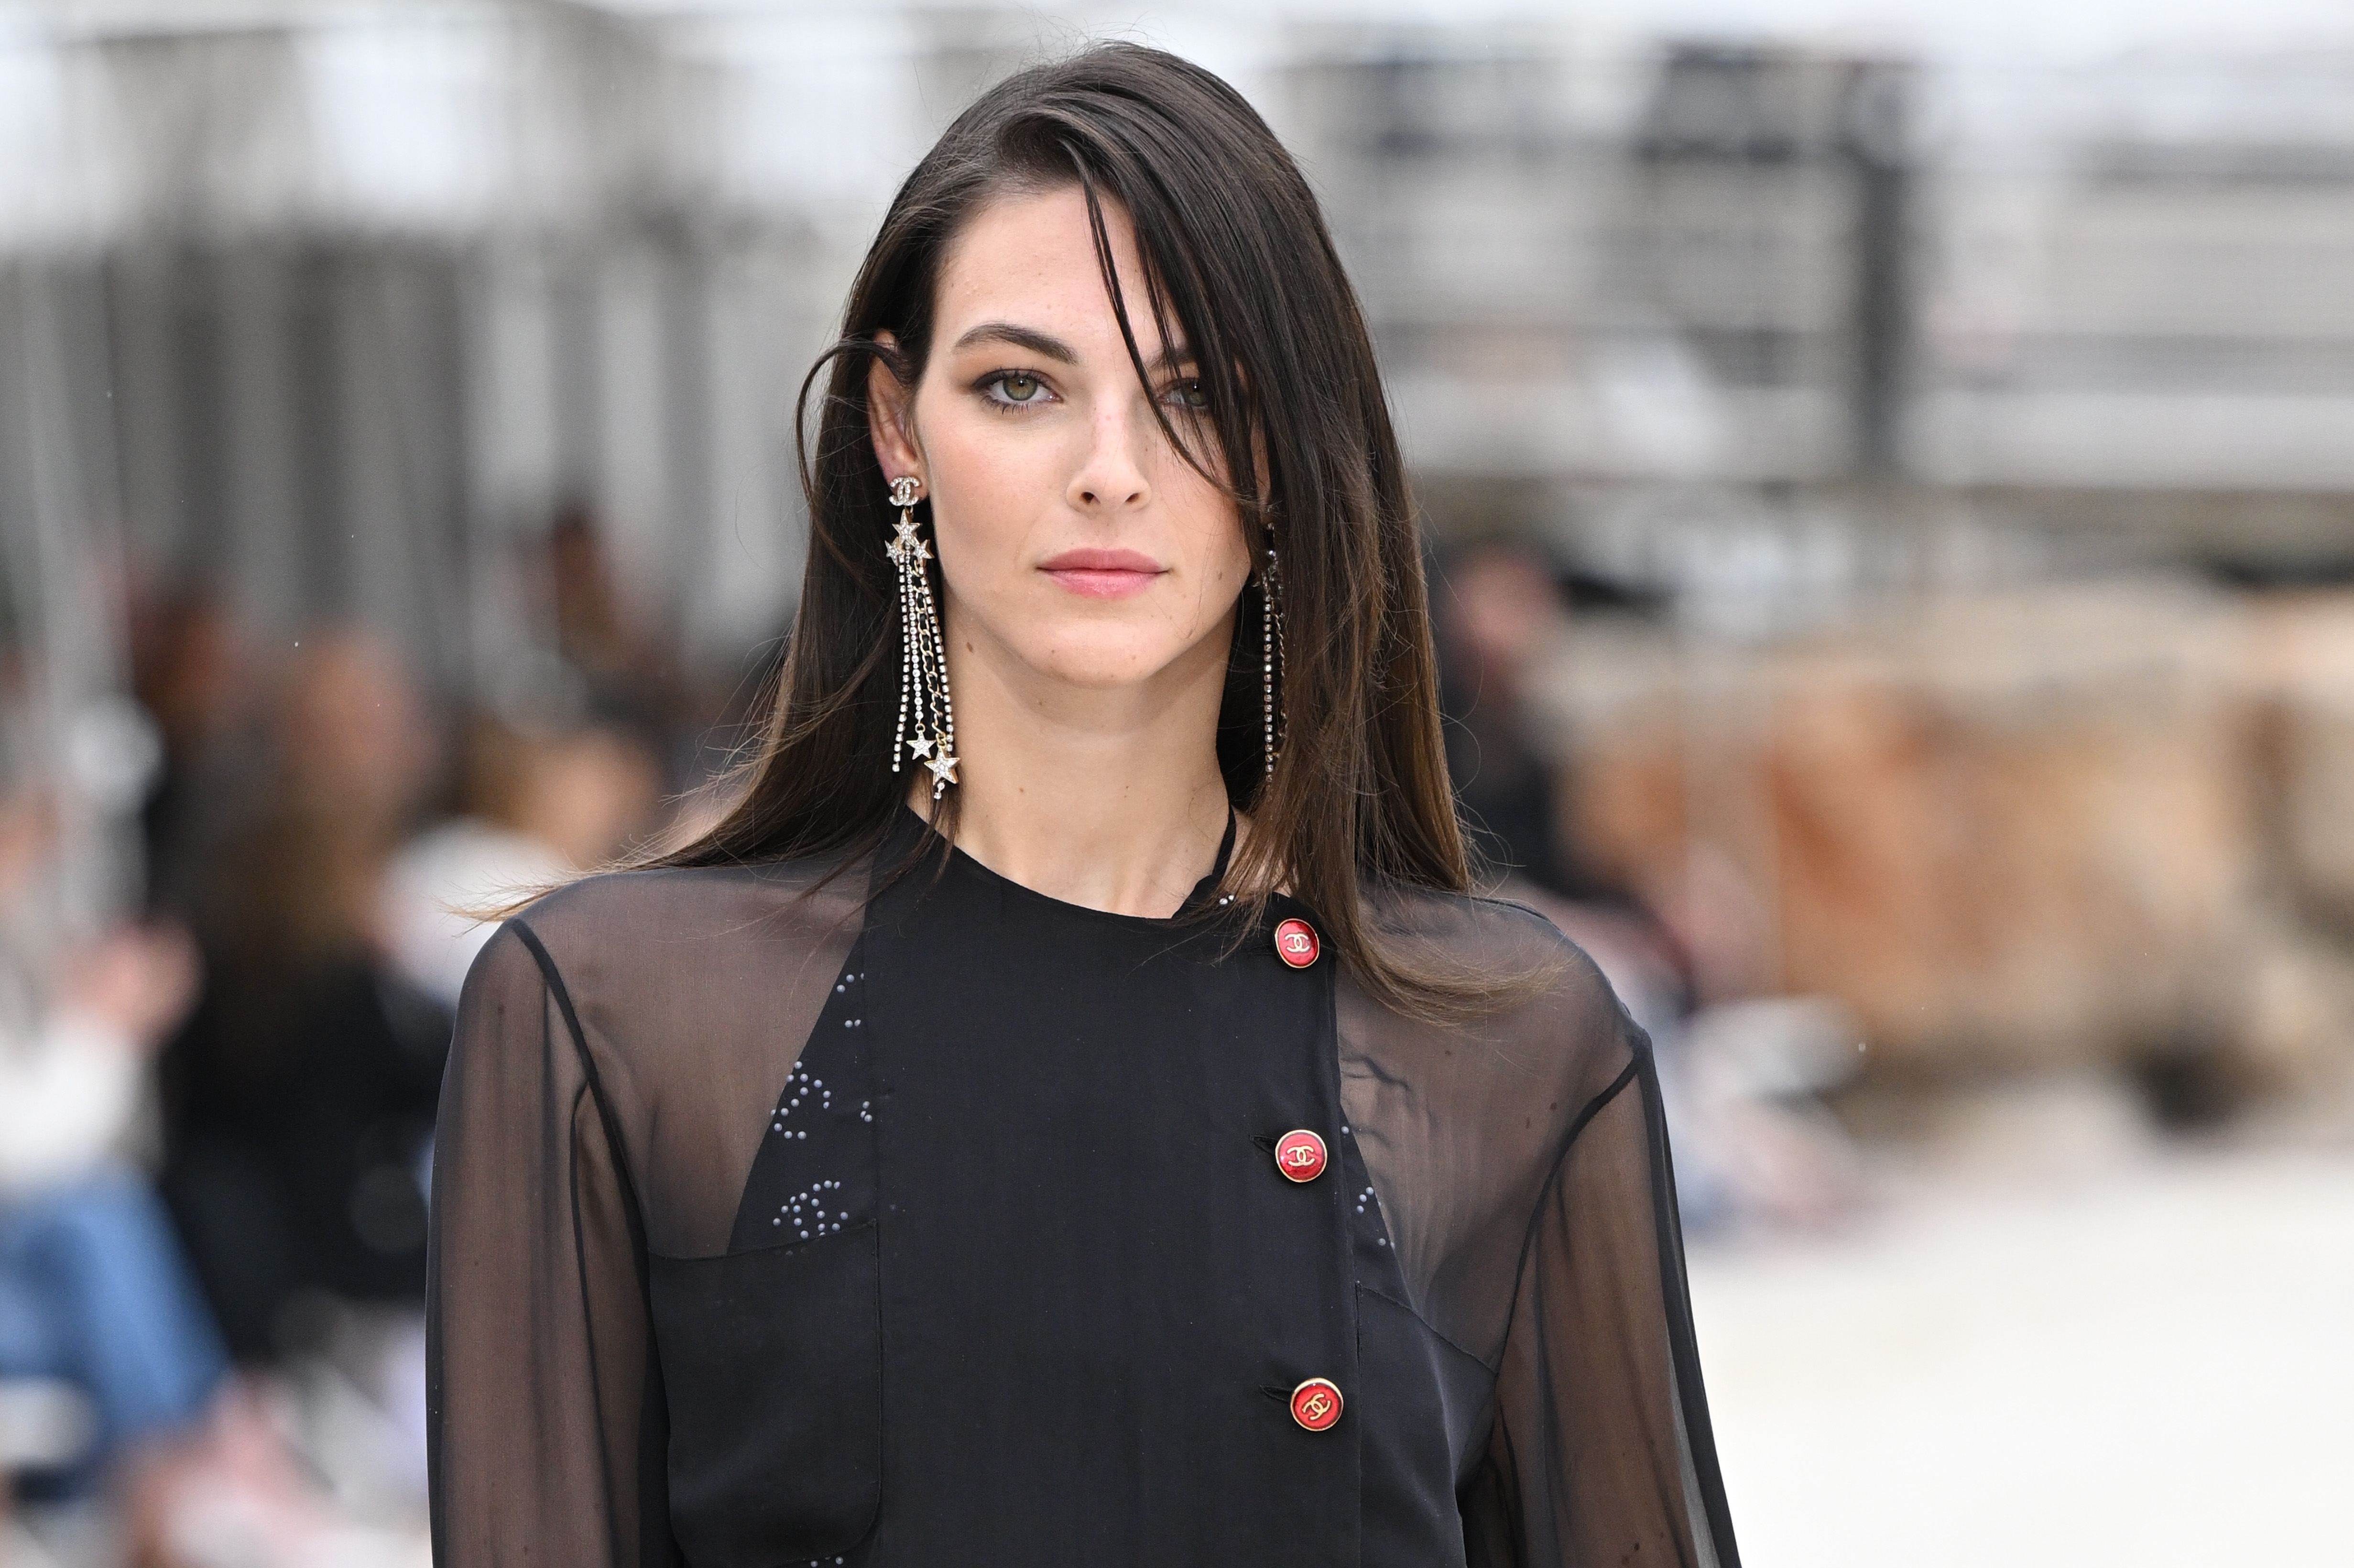 Chanel to Show Cruise Collection in Monaco in May – WWD